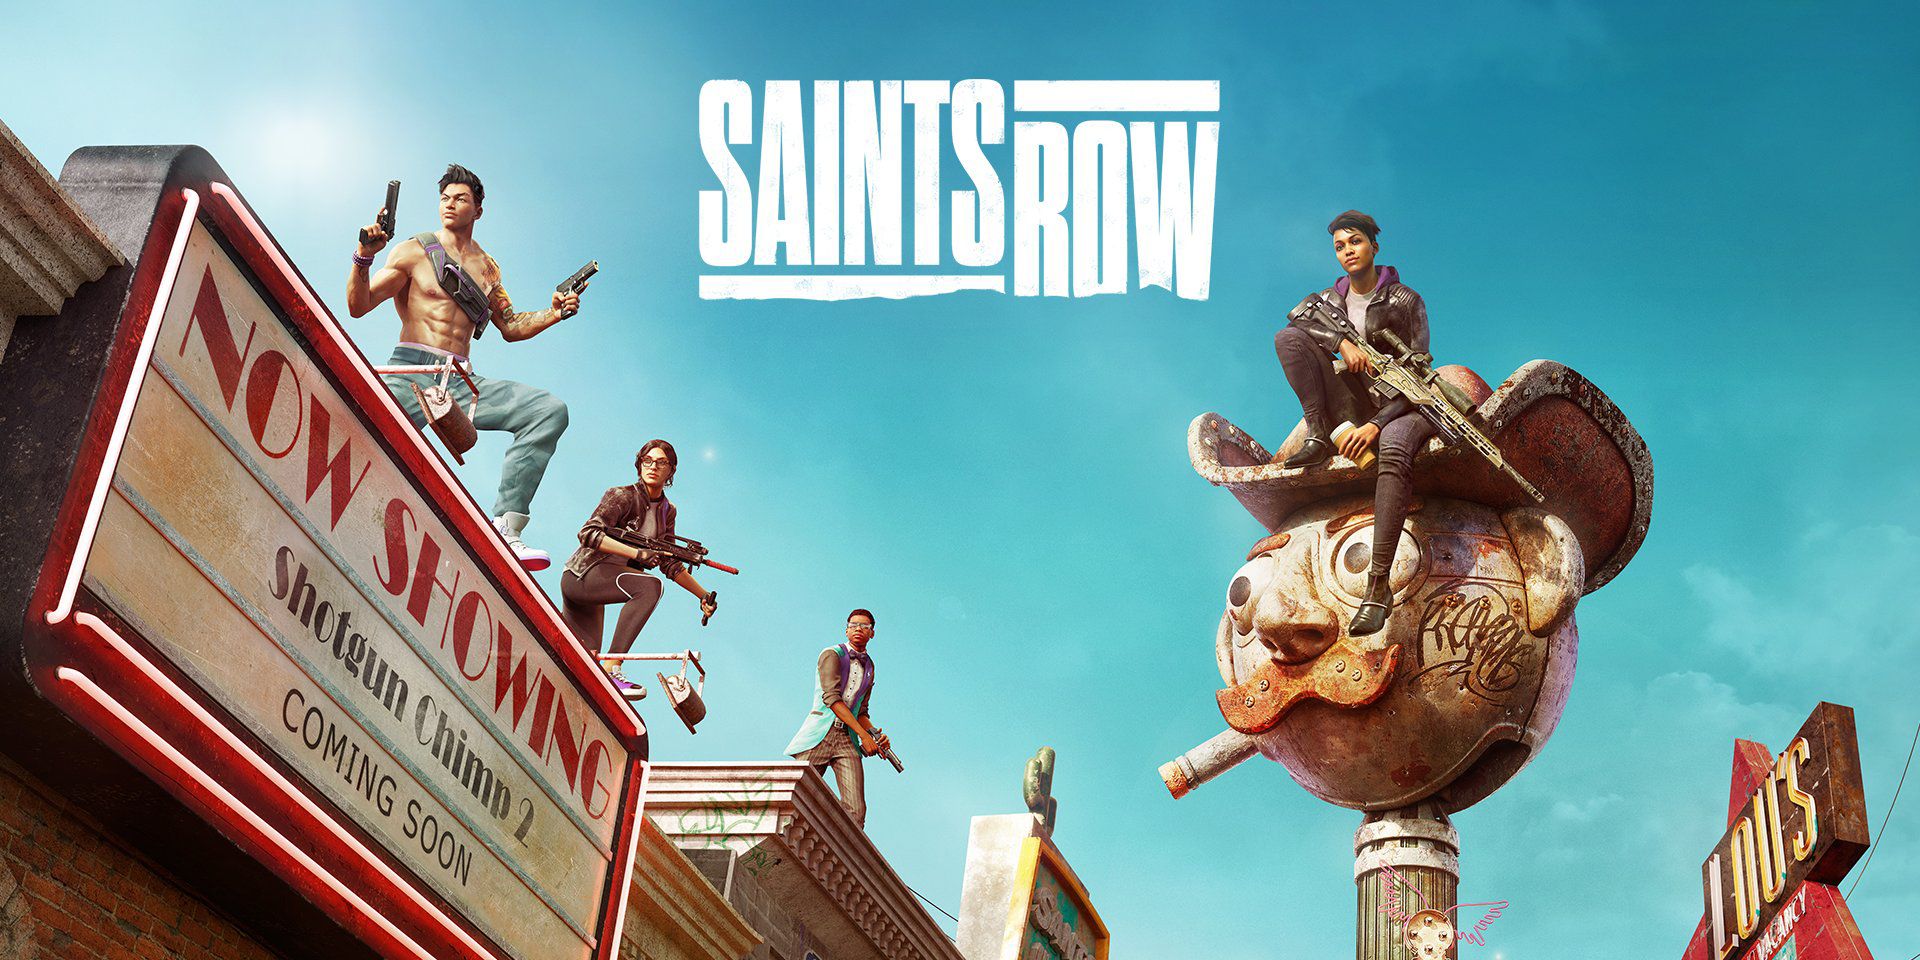 A cover image featuring the protagonists in the Saints Row reboot on top of a cinema.